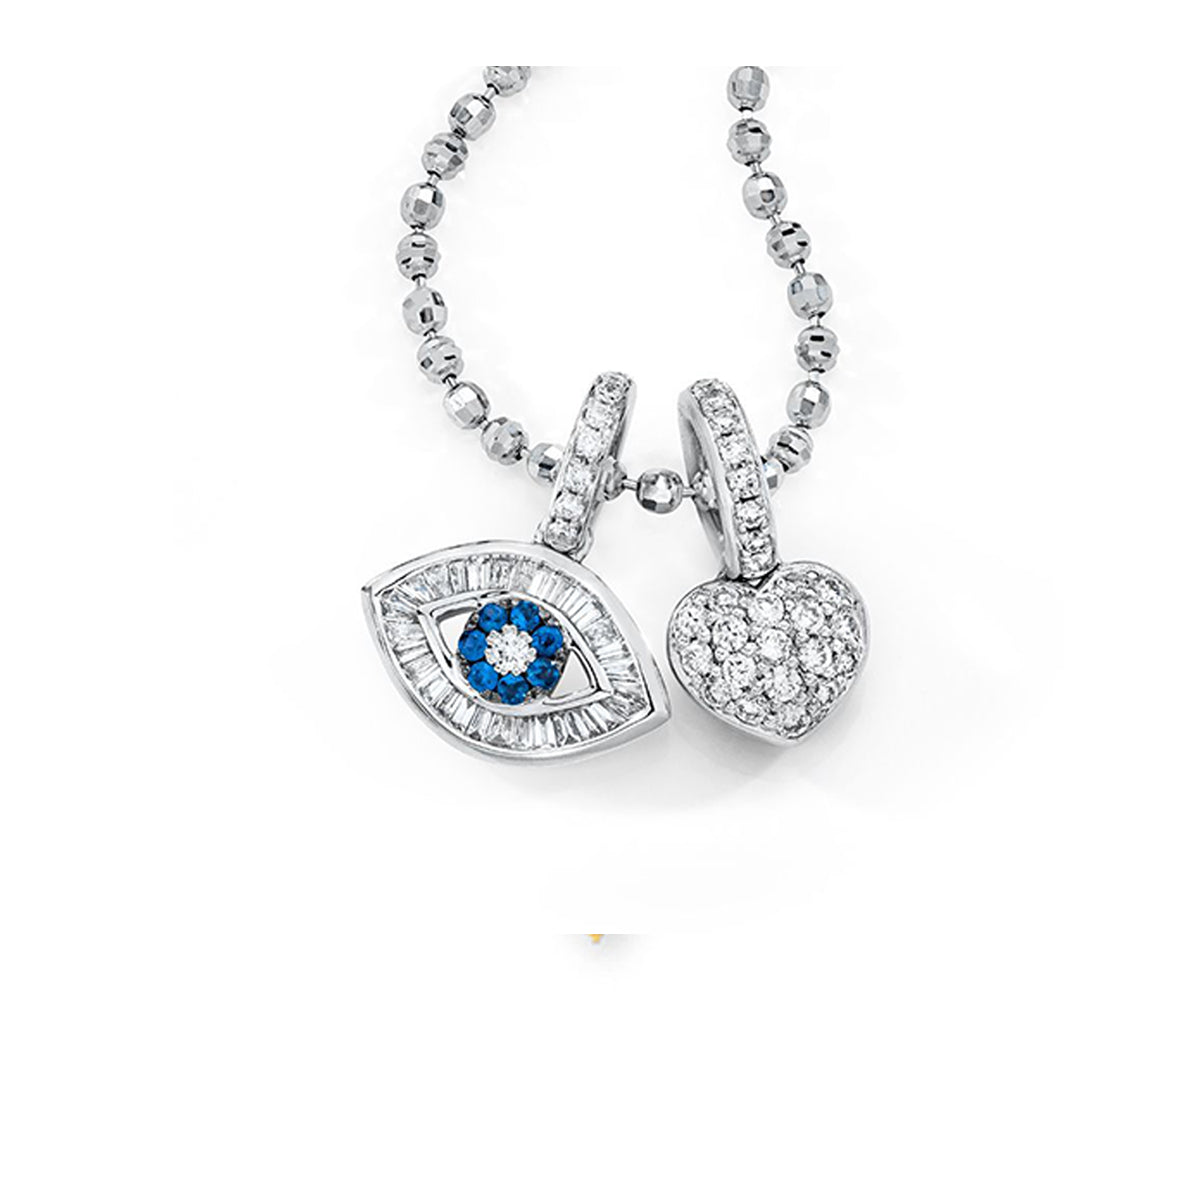 18K Small Baguette Evil Eye Charm with Pave Heart on Necklace - Charms & Necklace sold separately